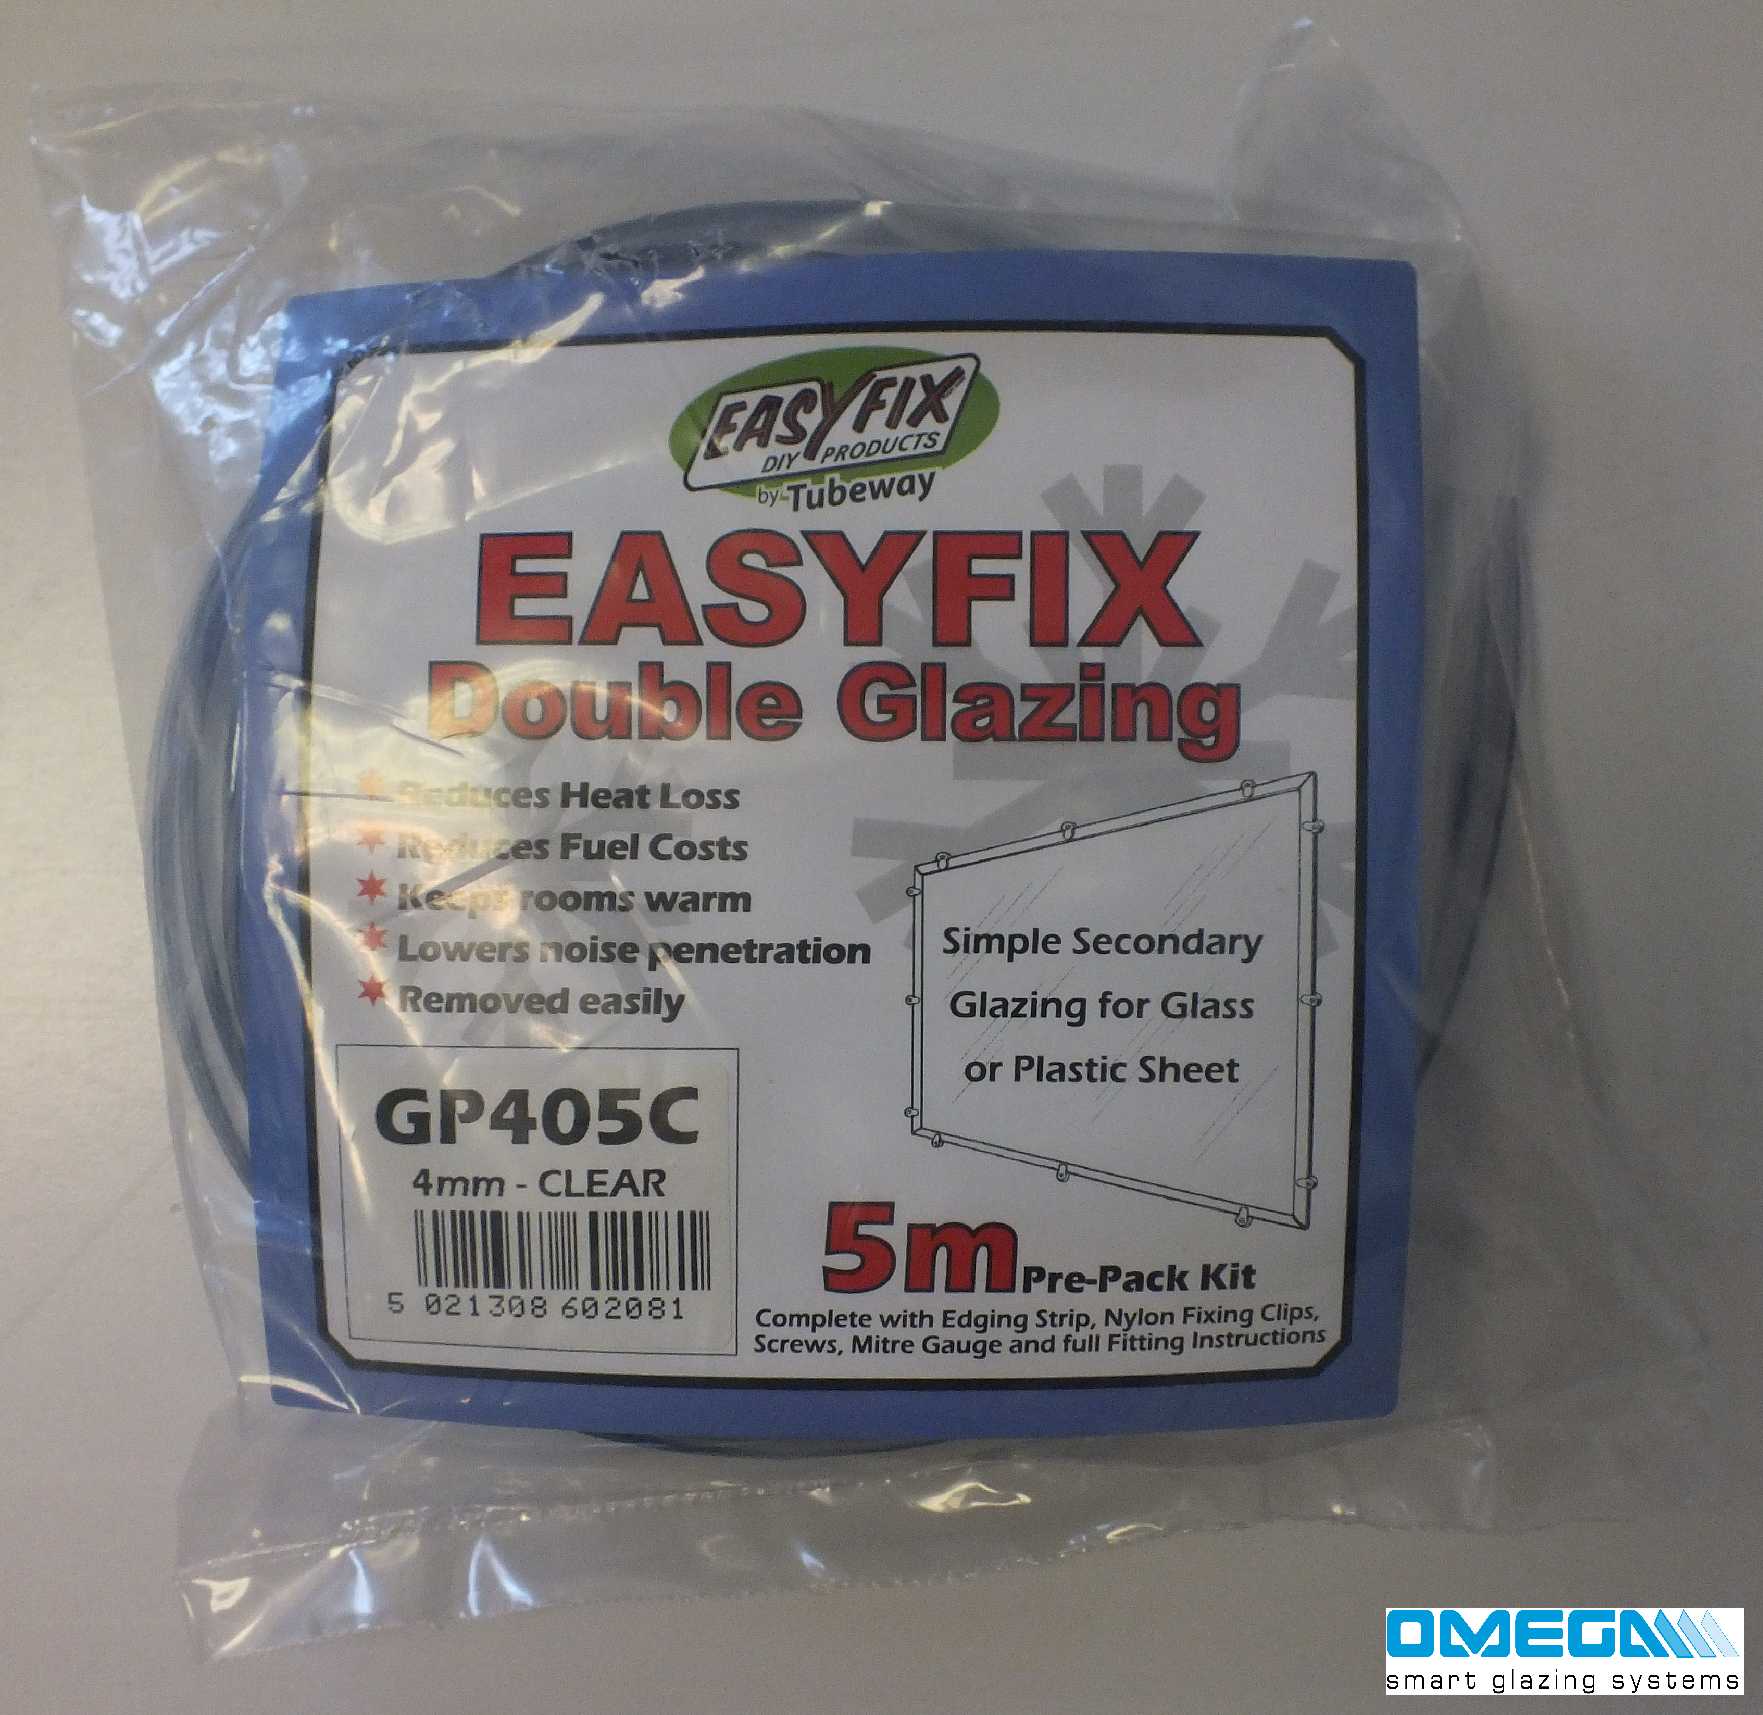 Buy Easyfix Clipglaze Edging Kit - 5m roll of edging for 3mm Glazing Thickness, Clear online today